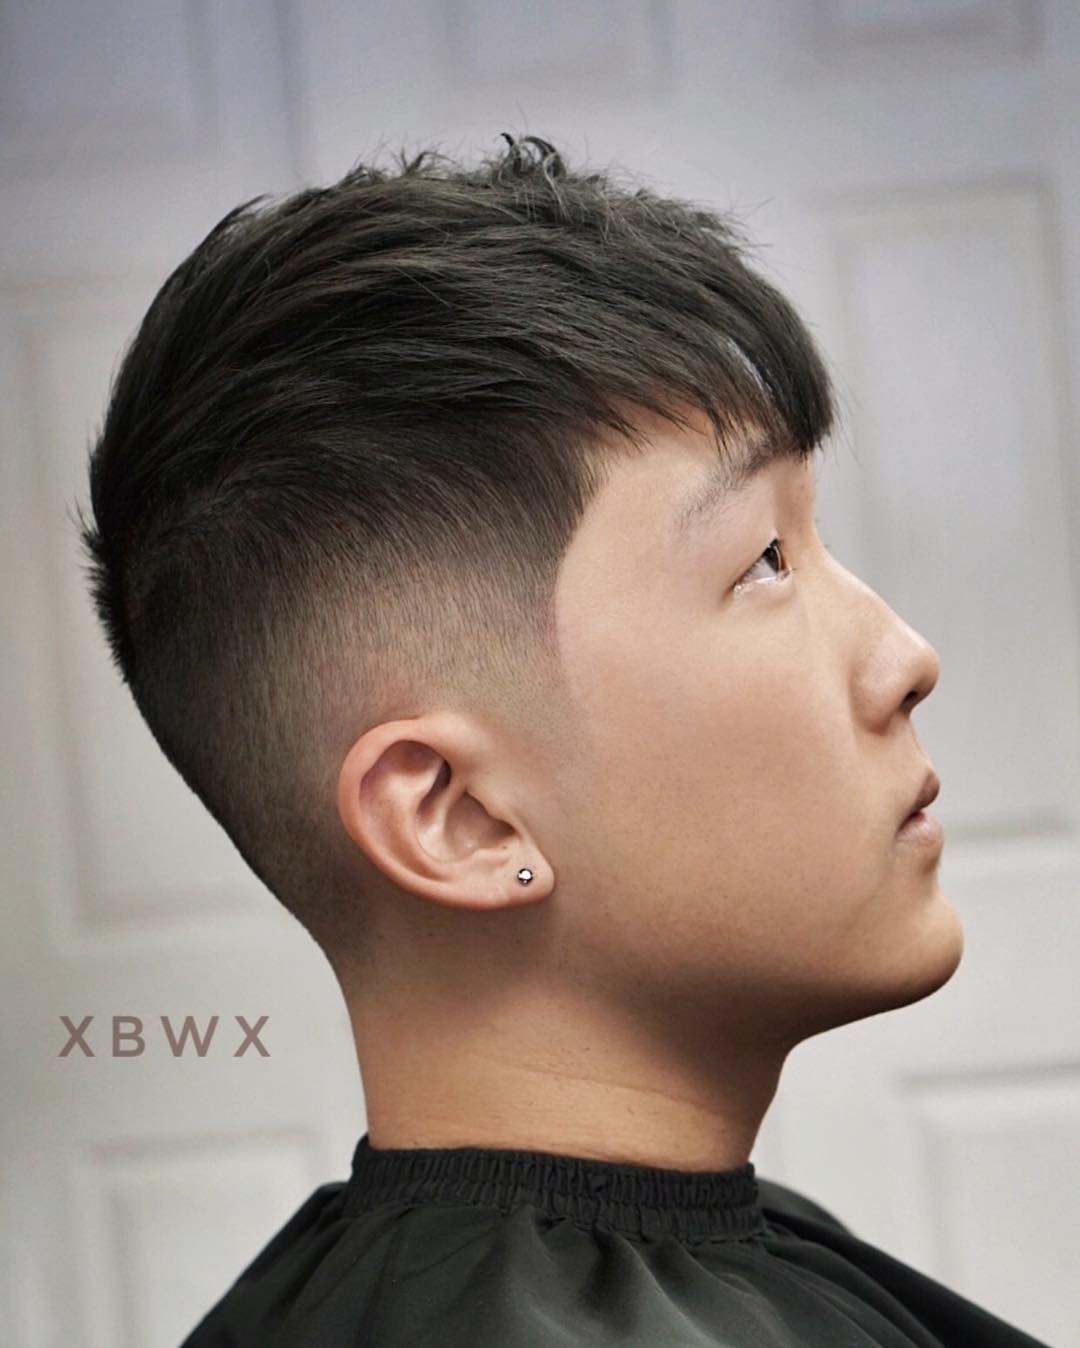 Best Hairstyles For Asian Men pertaining to Amazing Asian Boy Short Hairstyles